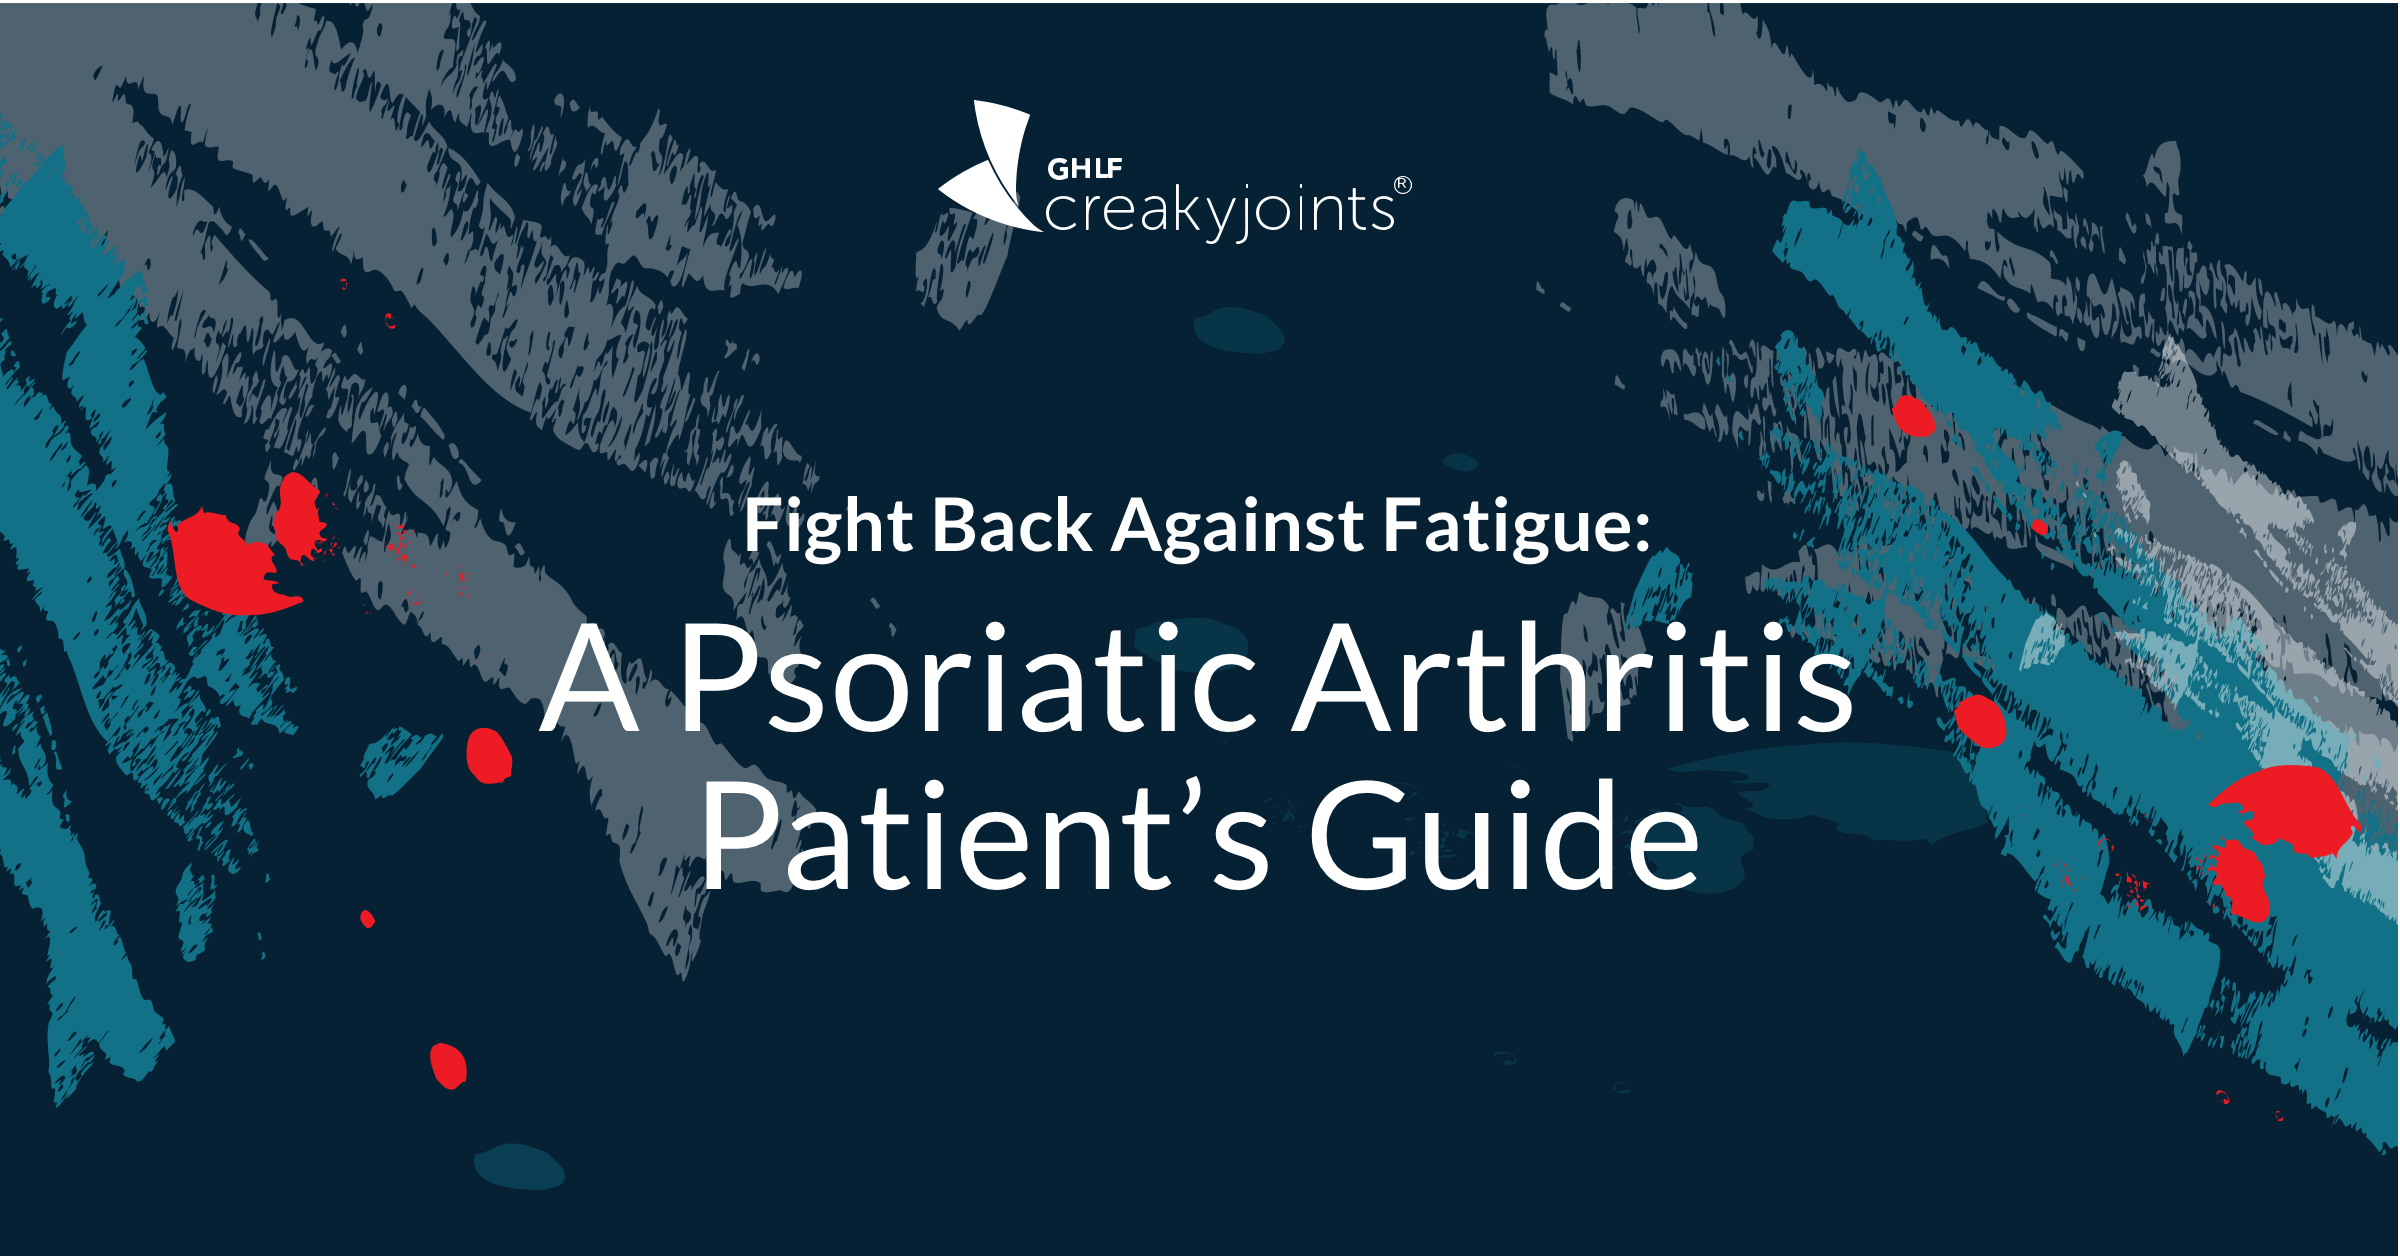 Fight Back Against Fatigue: A Psoriatic Arthritis Patient's Guide